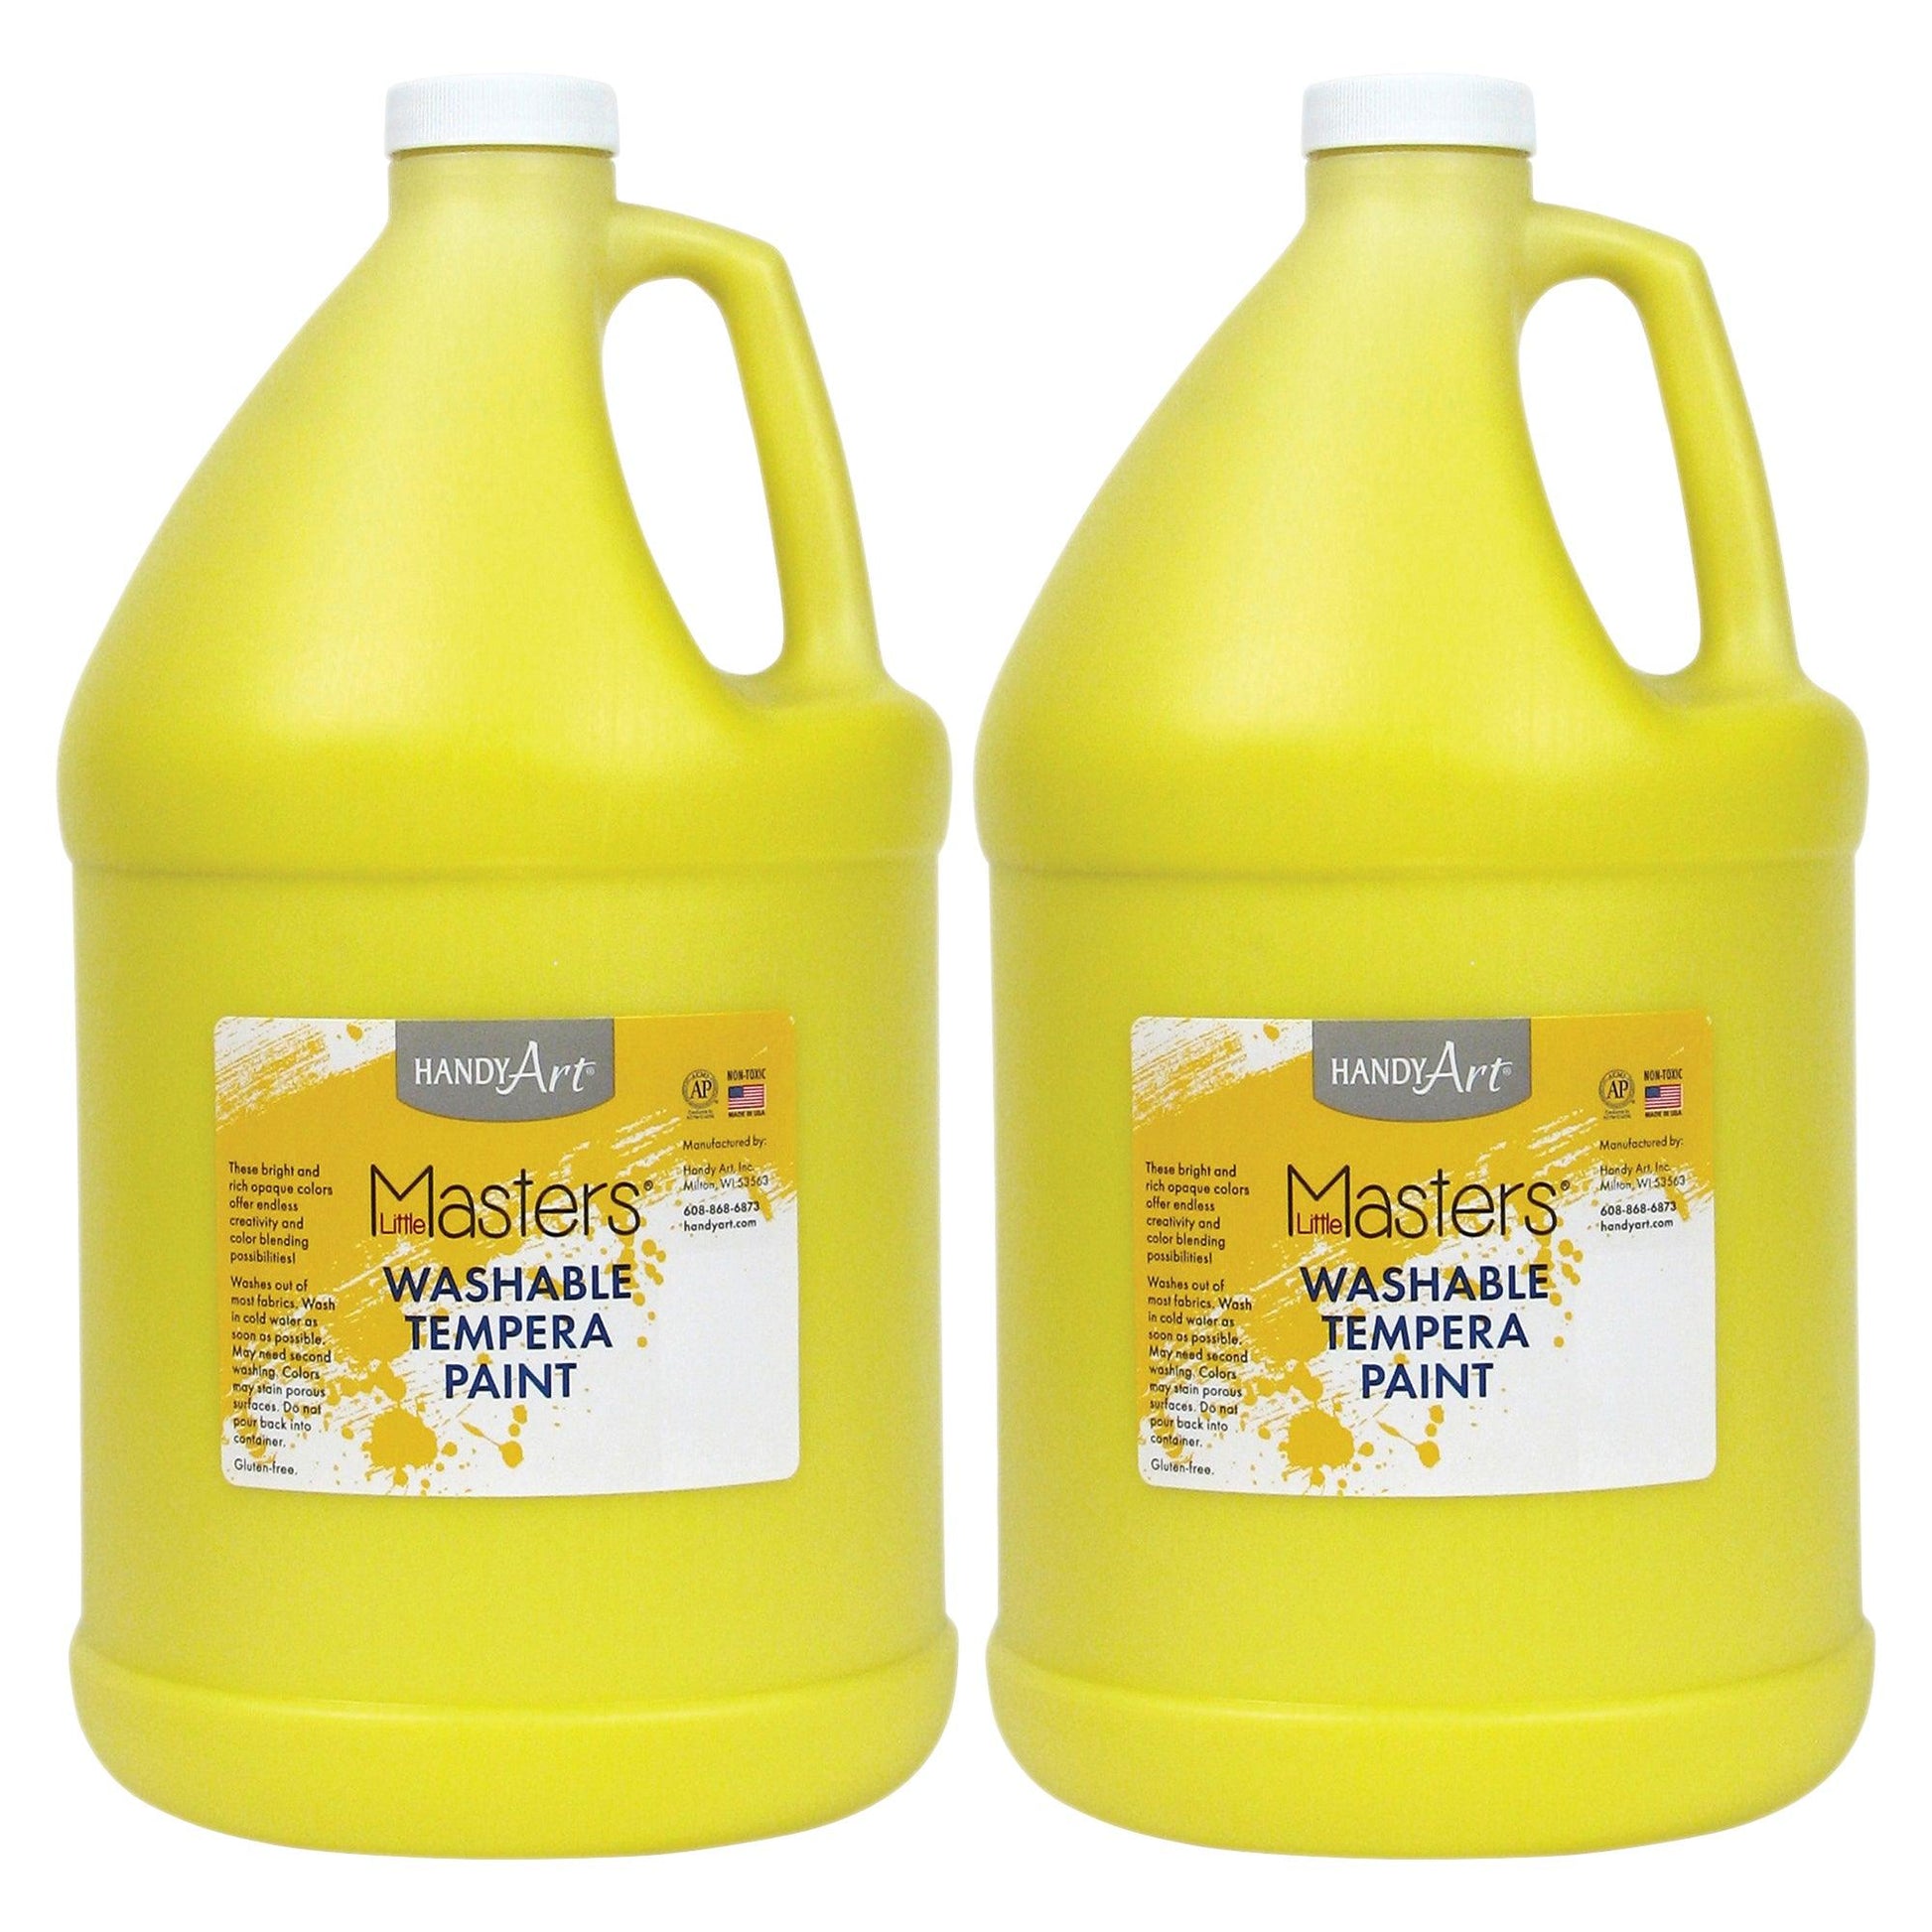 Little Masters® Washable Tempera Paint, Yellow, Gallon, Pack of 2 - Loomini